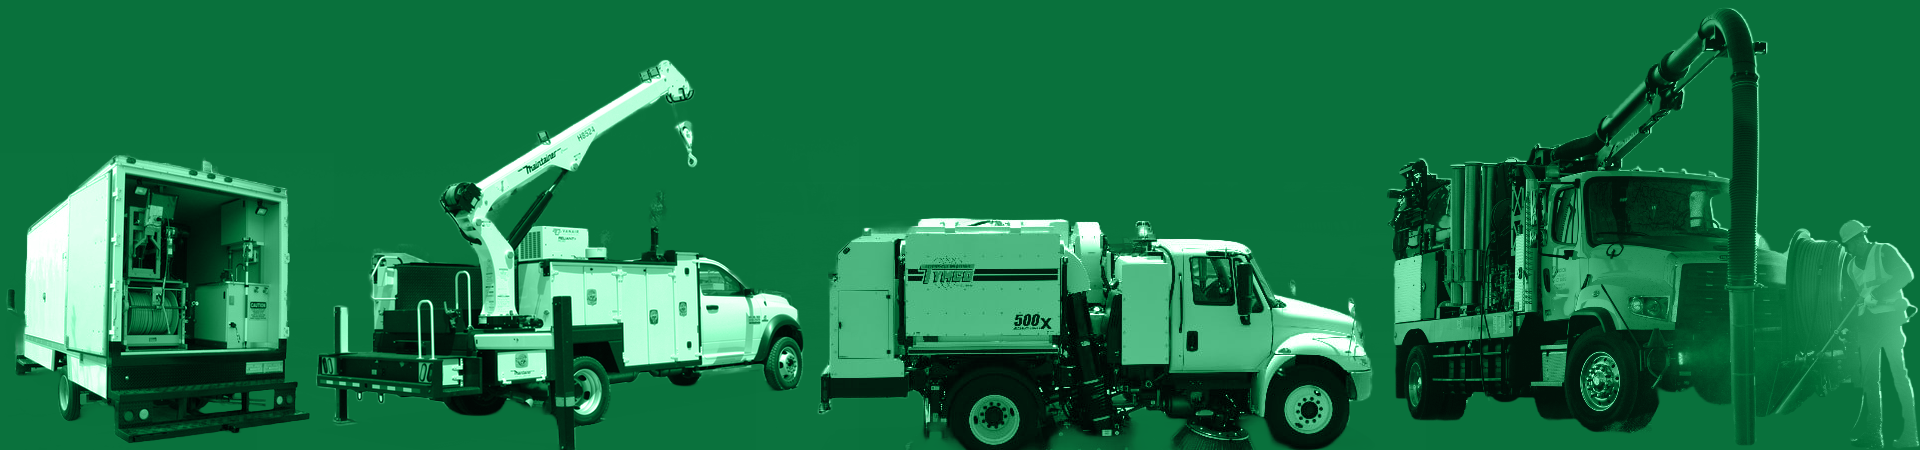 Used Trucks that Work Home Page showing Tymco sweeper and a Vac Truck.